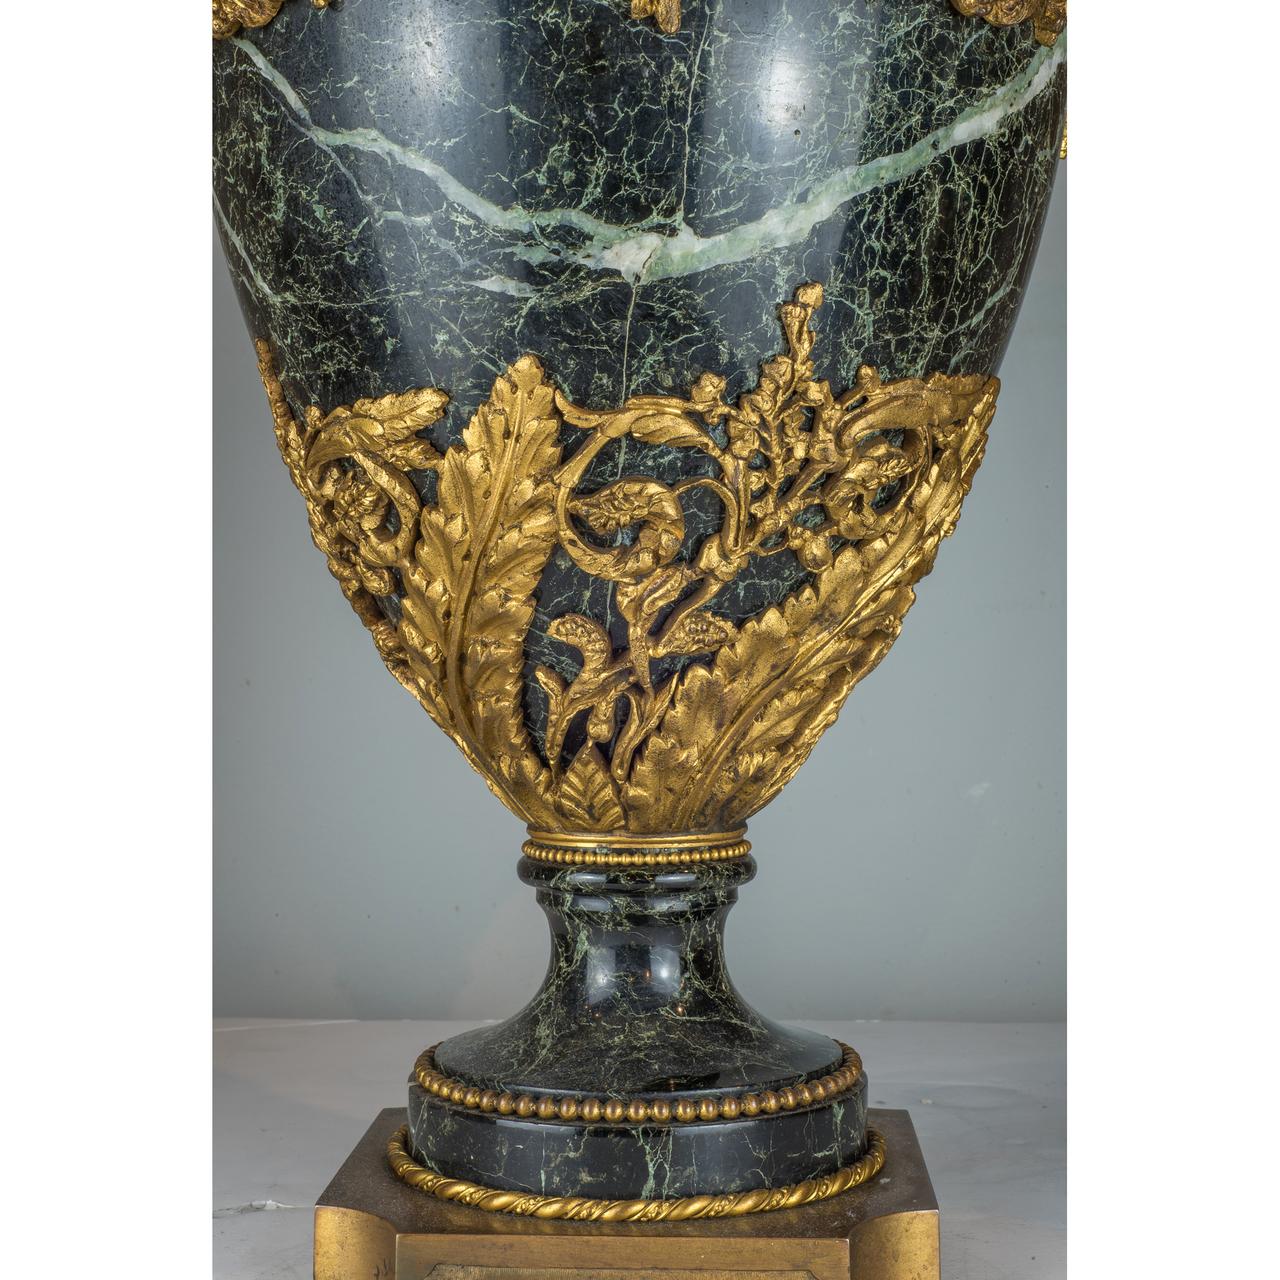 A Grand Ormolu-Mounted Verde Antico Marble Urns with Serpent Handles For Sale 1